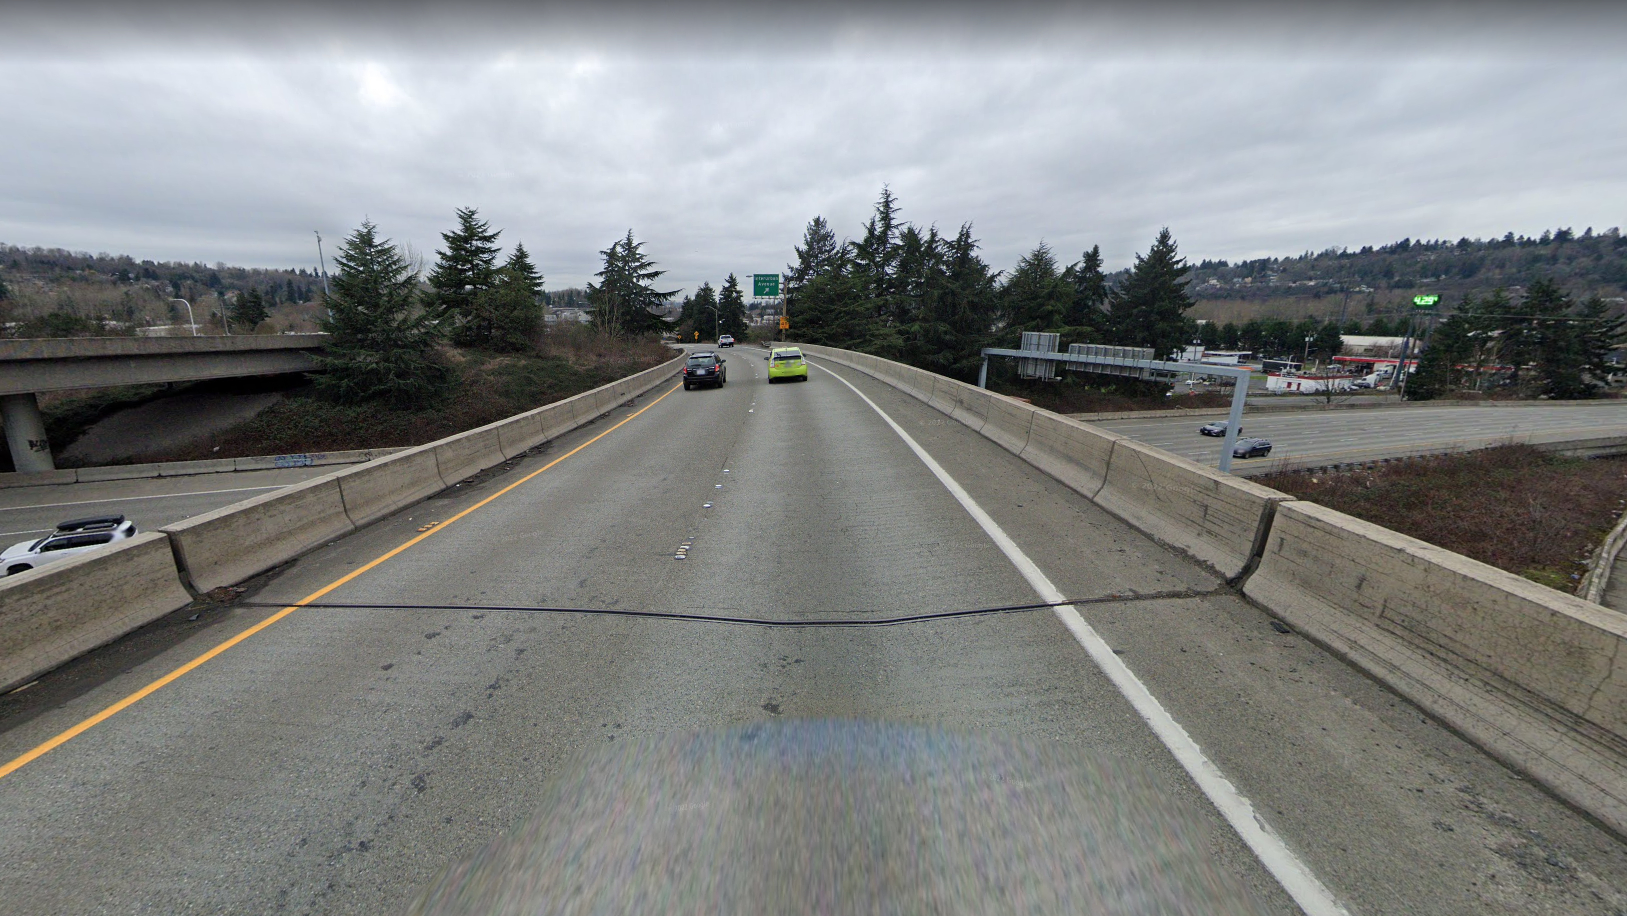 News: Teen driver charged after multi-injury crash on SR-599 in Tukwila